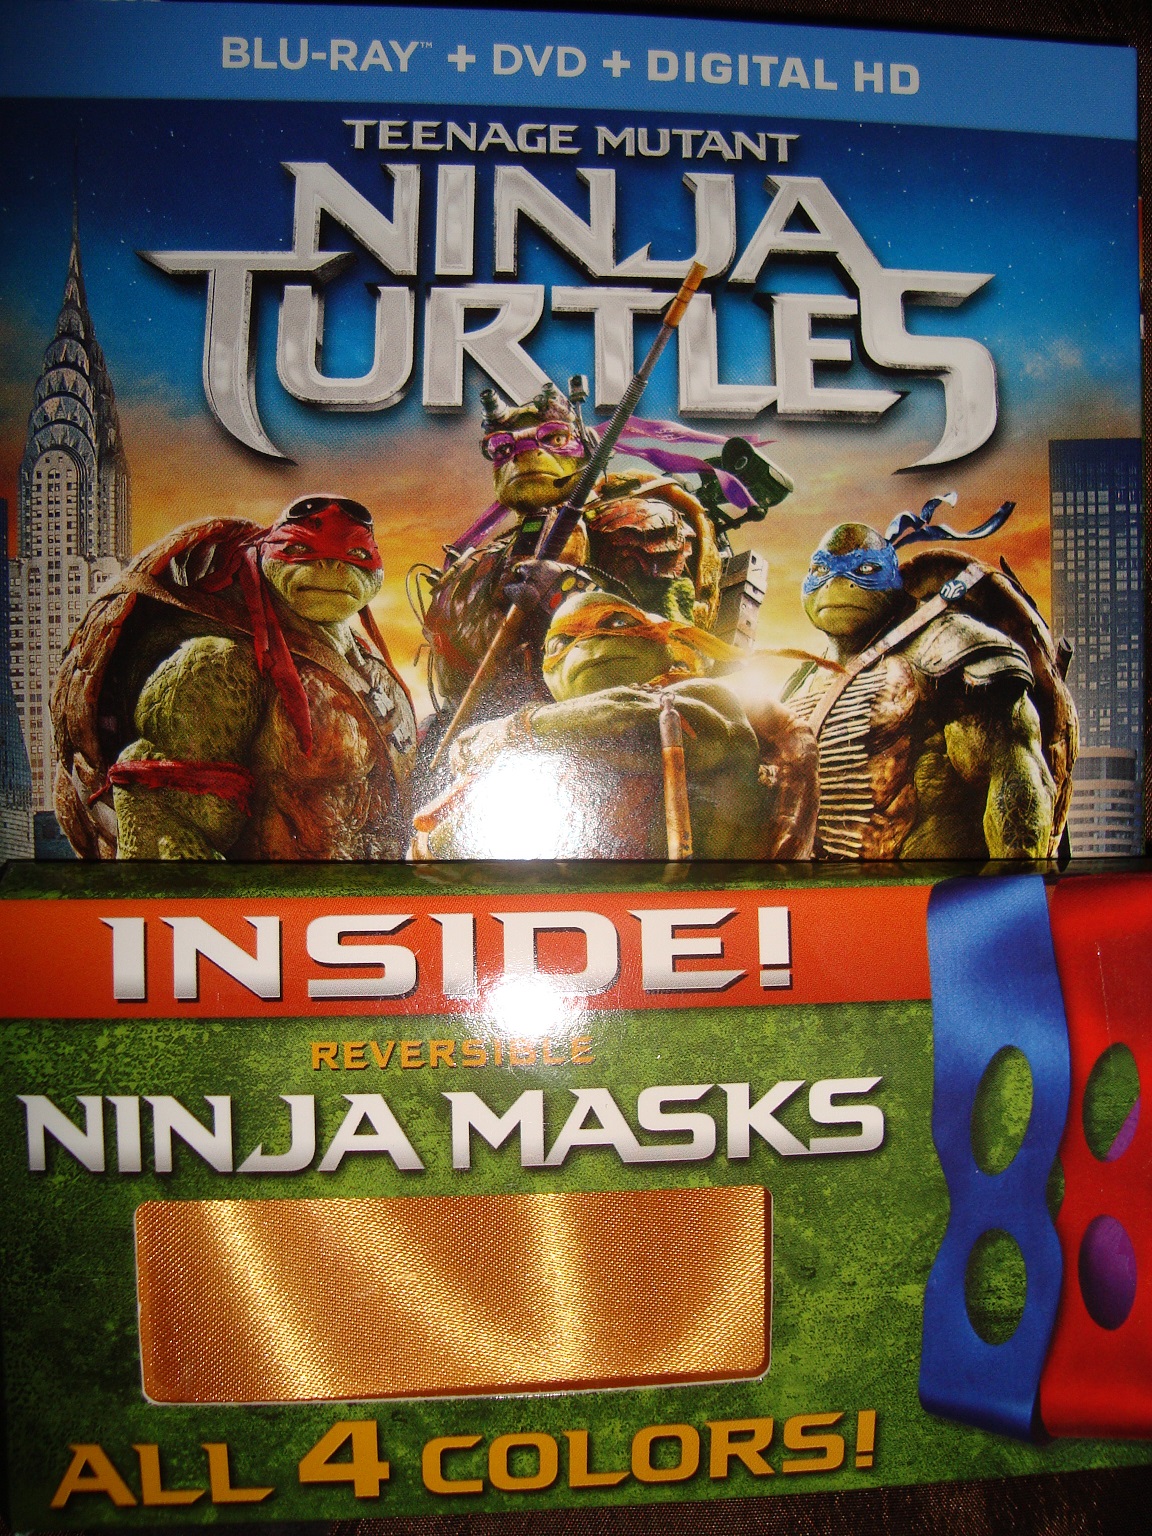 Blu-Ray DVD Combo with Masks_1